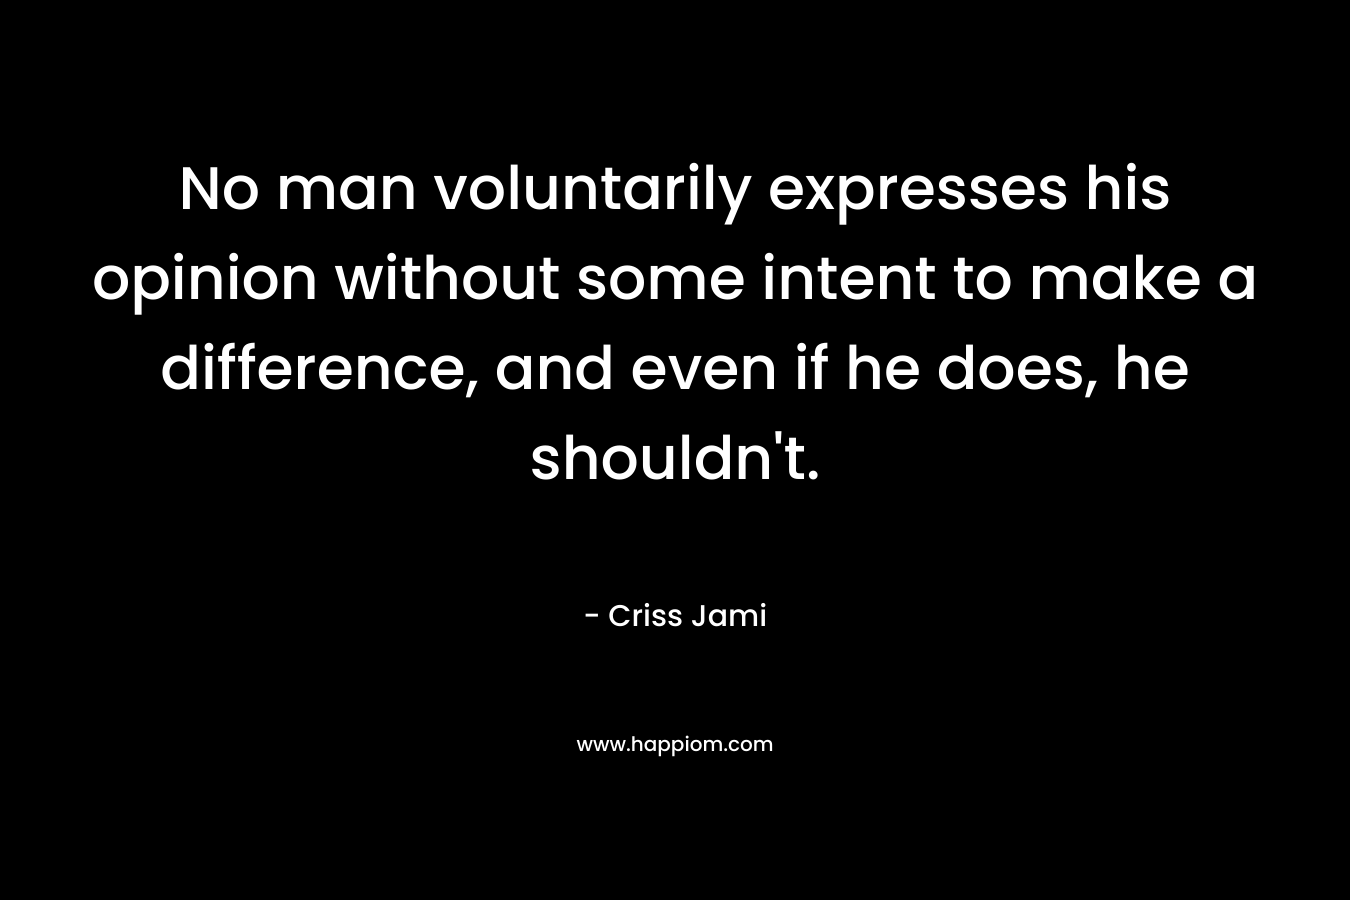 No man voluntarily expresses his opinion without some intent to make a difference, and even if he does, he shouldn't.